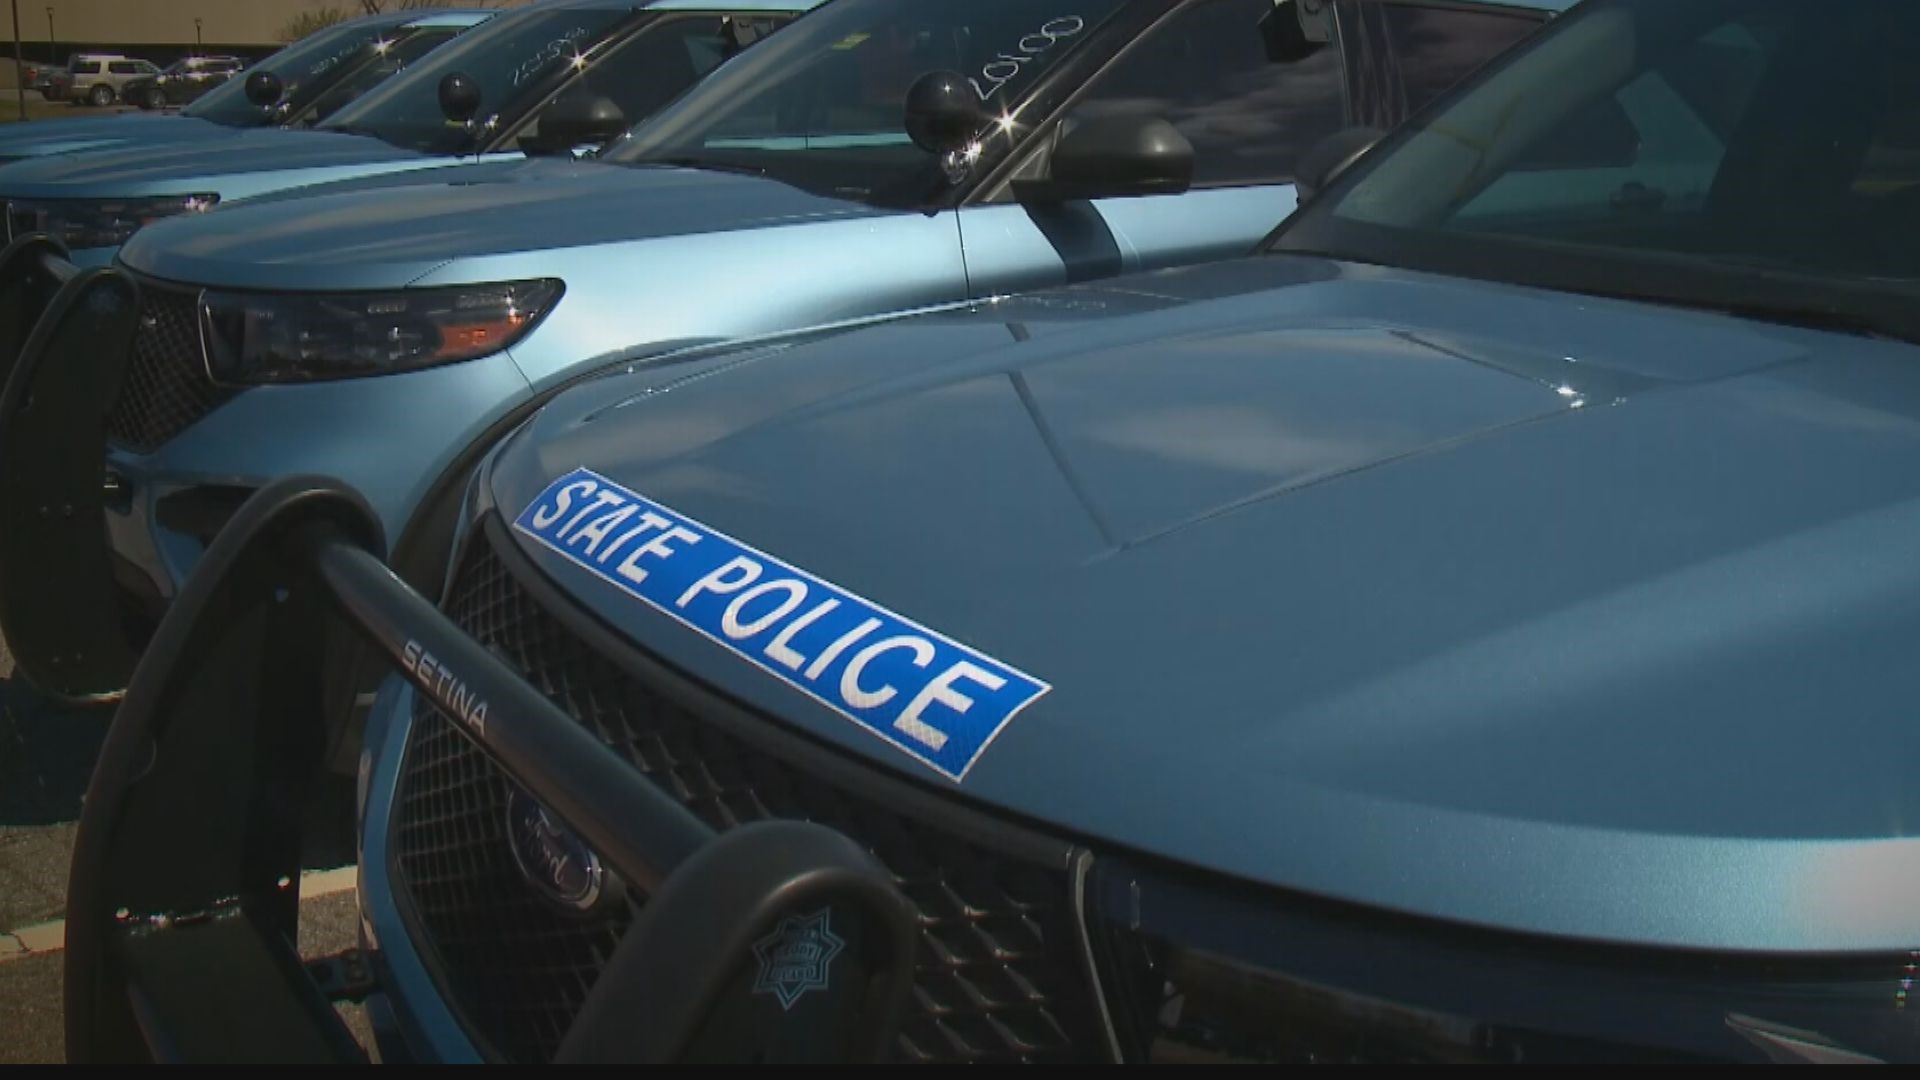 Maine State Police will still respond to certain calls, but patrol duties lay in the hands of the Washington County Sheriff, a role he says is unfitting.